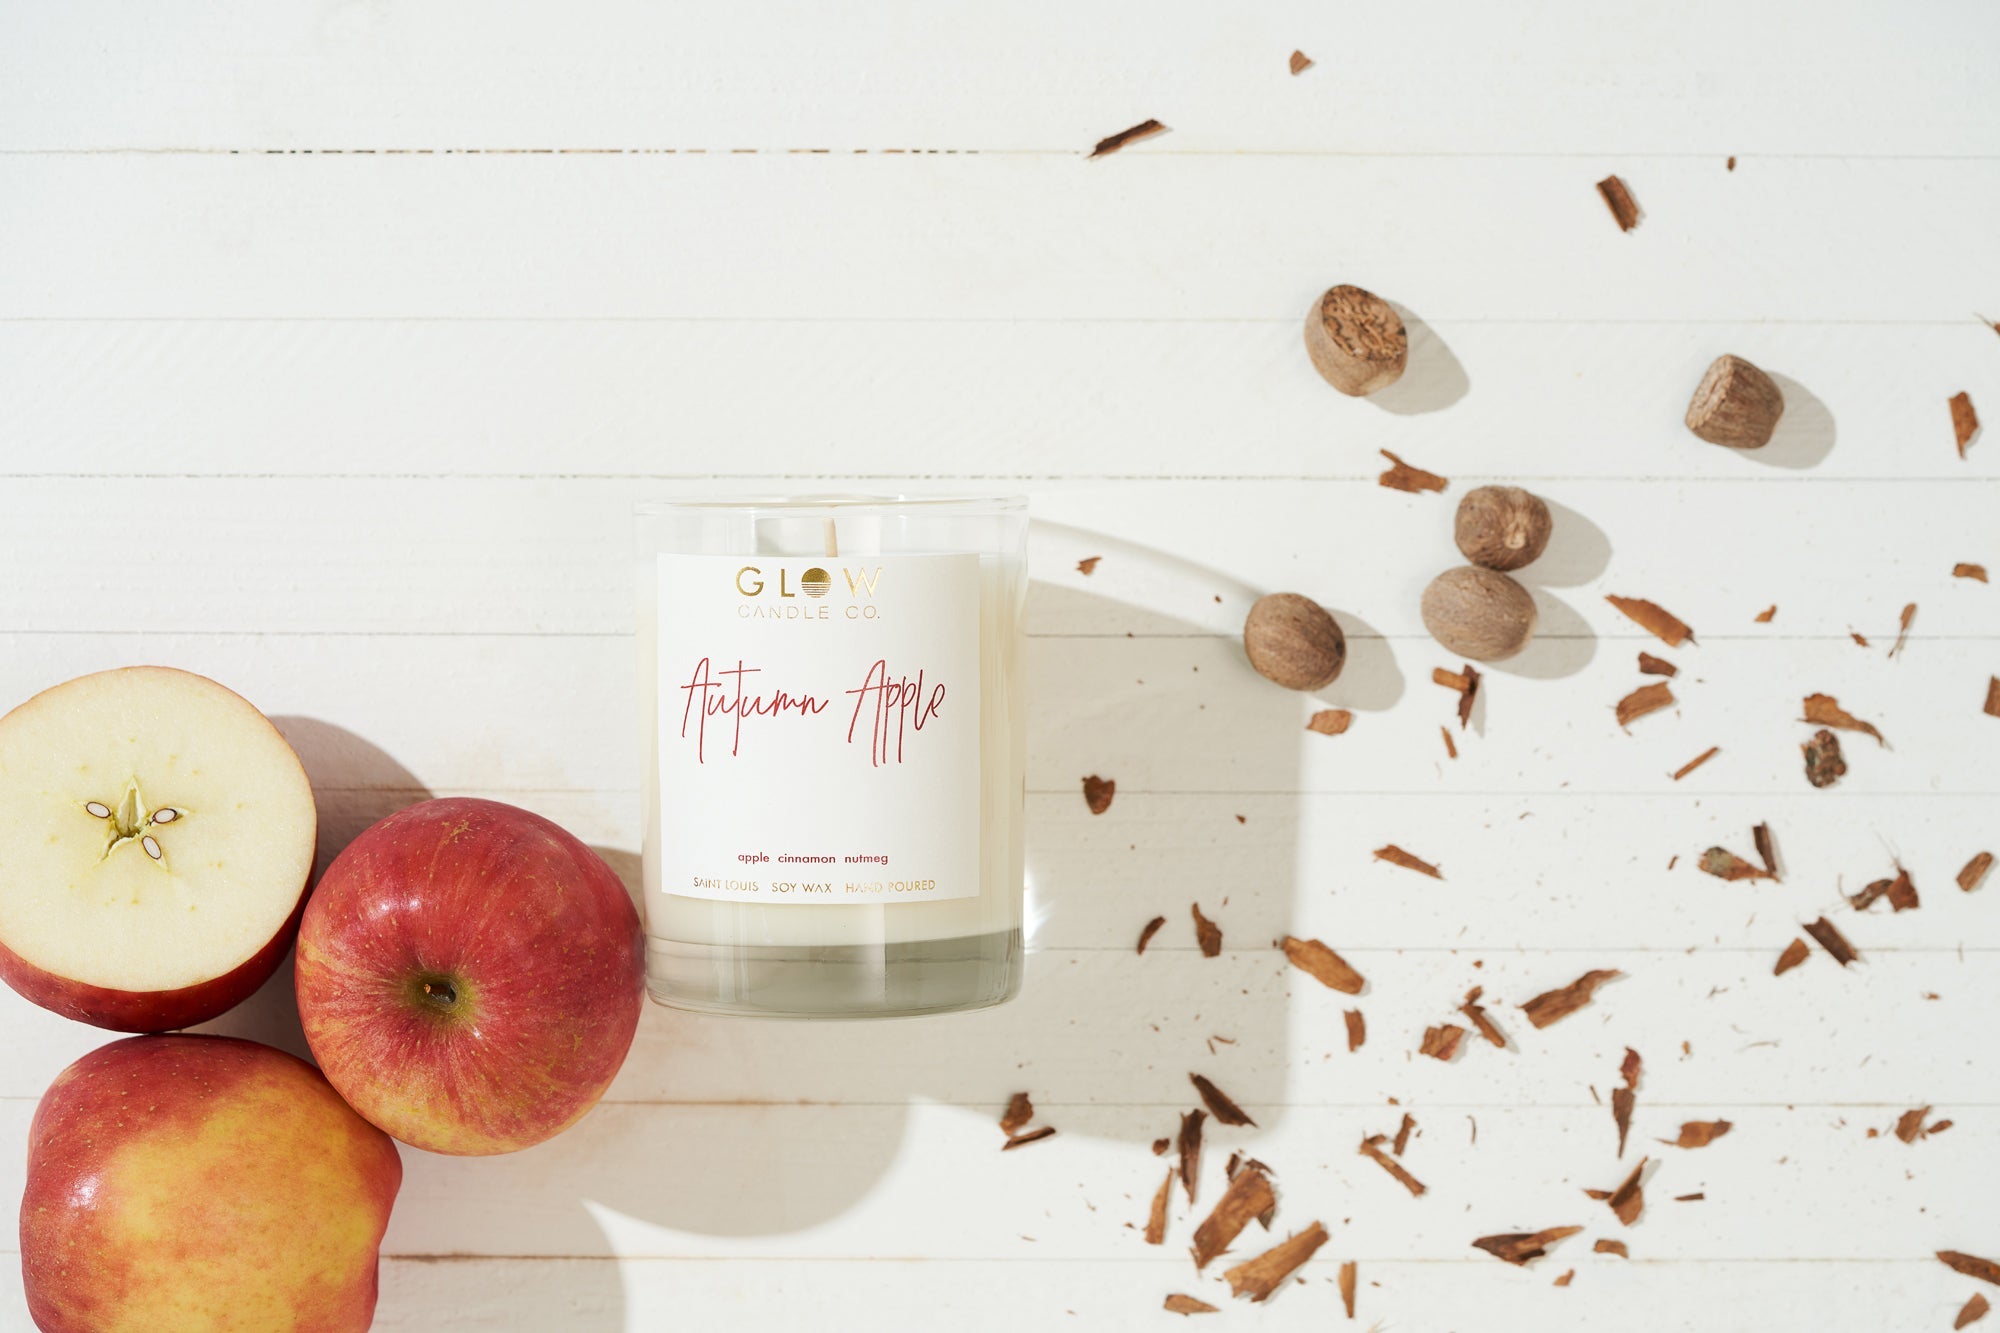  Autumn Apple by Glow Candle Company Glow Candle Company Perfumarie